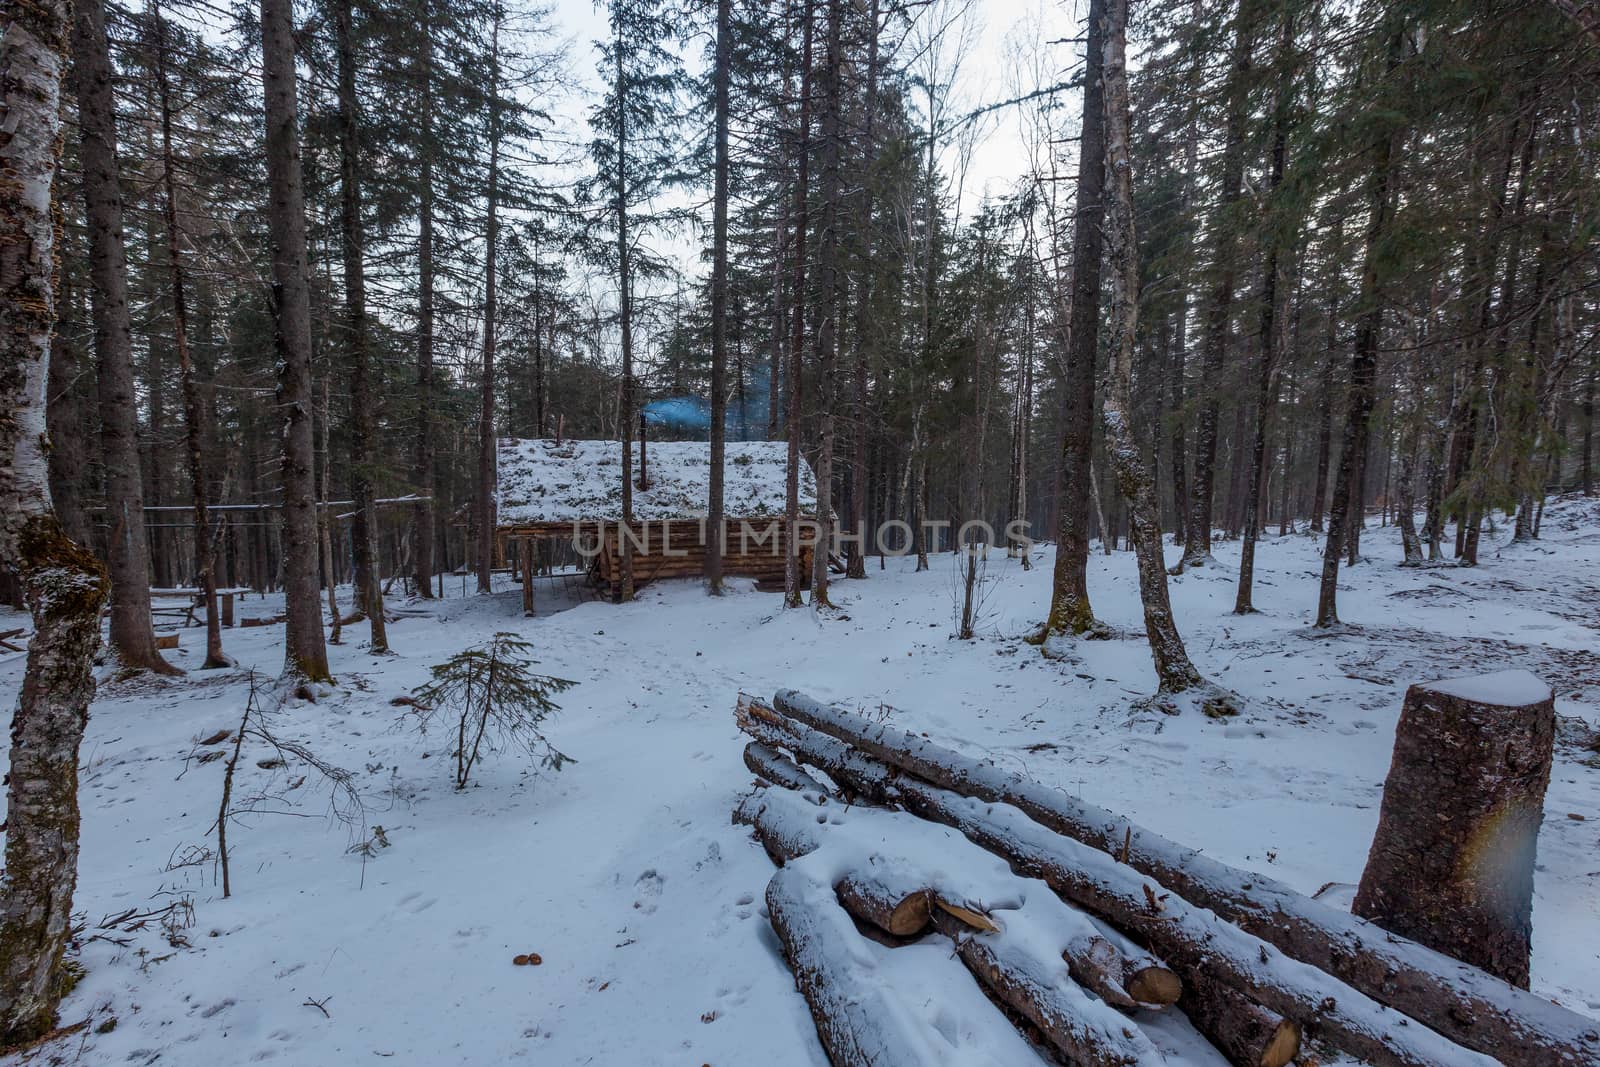 The pristine nature of the Zeya reserve. A wooden winter hut stands among the taiga